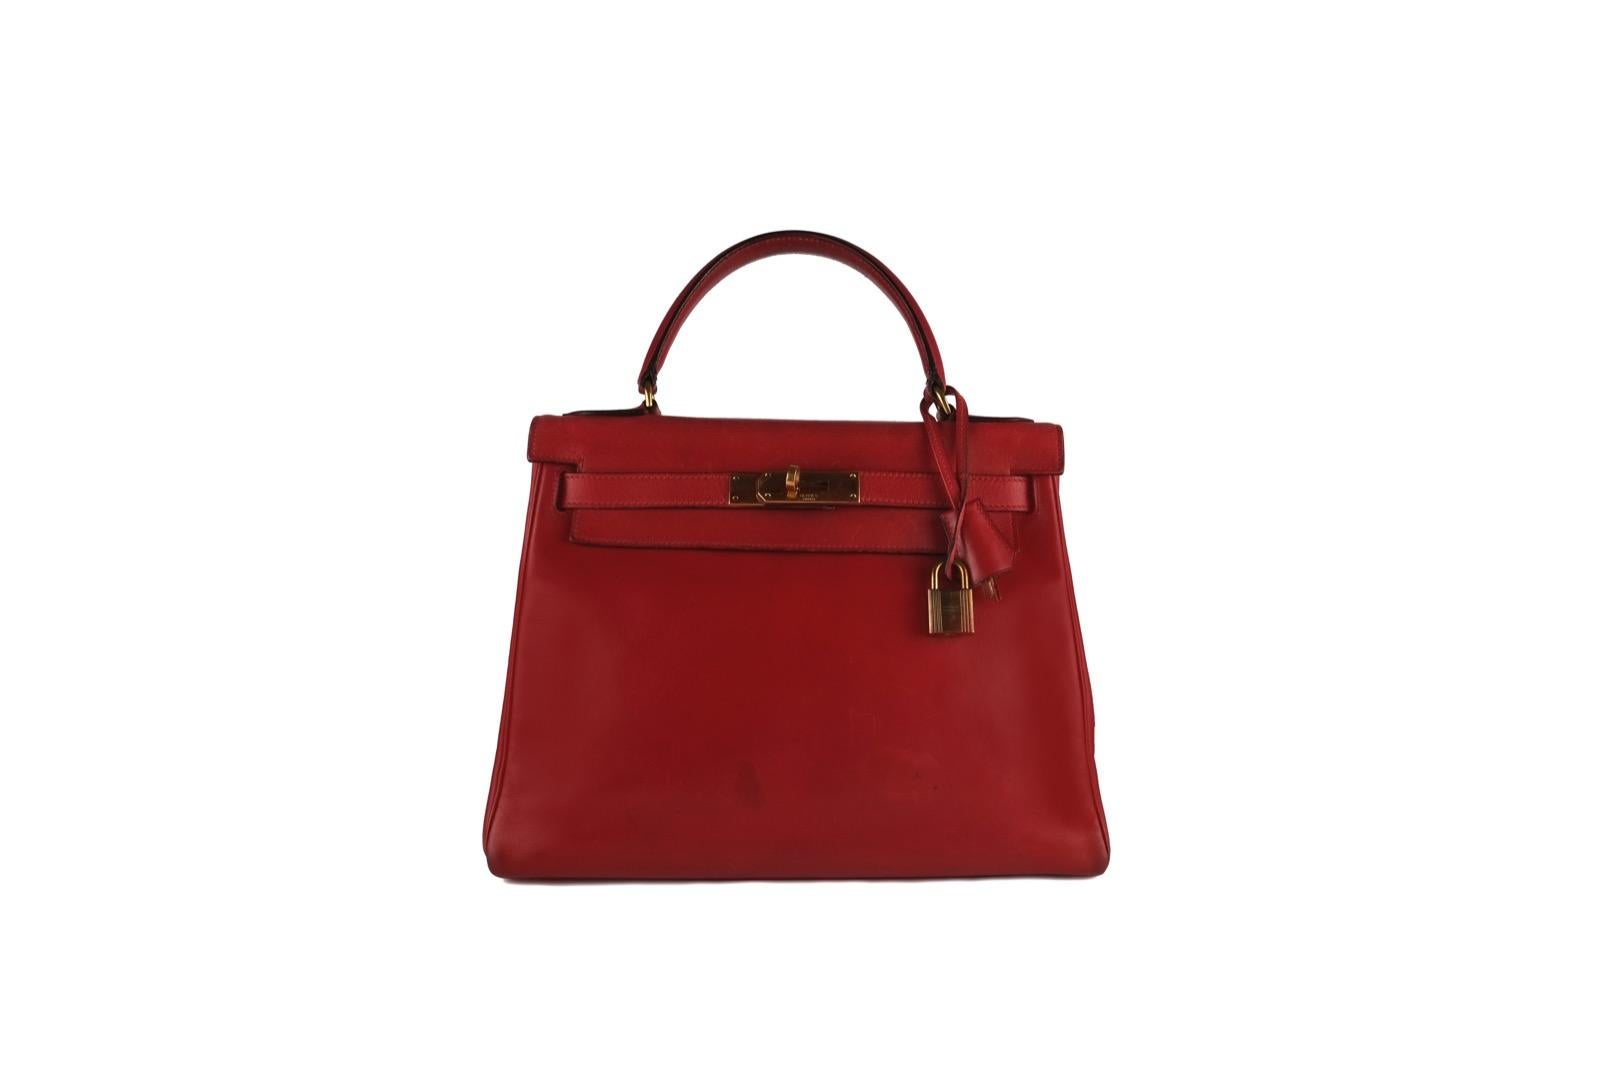 Superb Hermes Kelly handbag 28 cm in red box leather, gold Hardware, red leather handle, allowing a hand carry.

A flap closure.
Inner lining in red leather, three patch pockets.
Sold with zipper, key, padlock, bell.
Signature: 